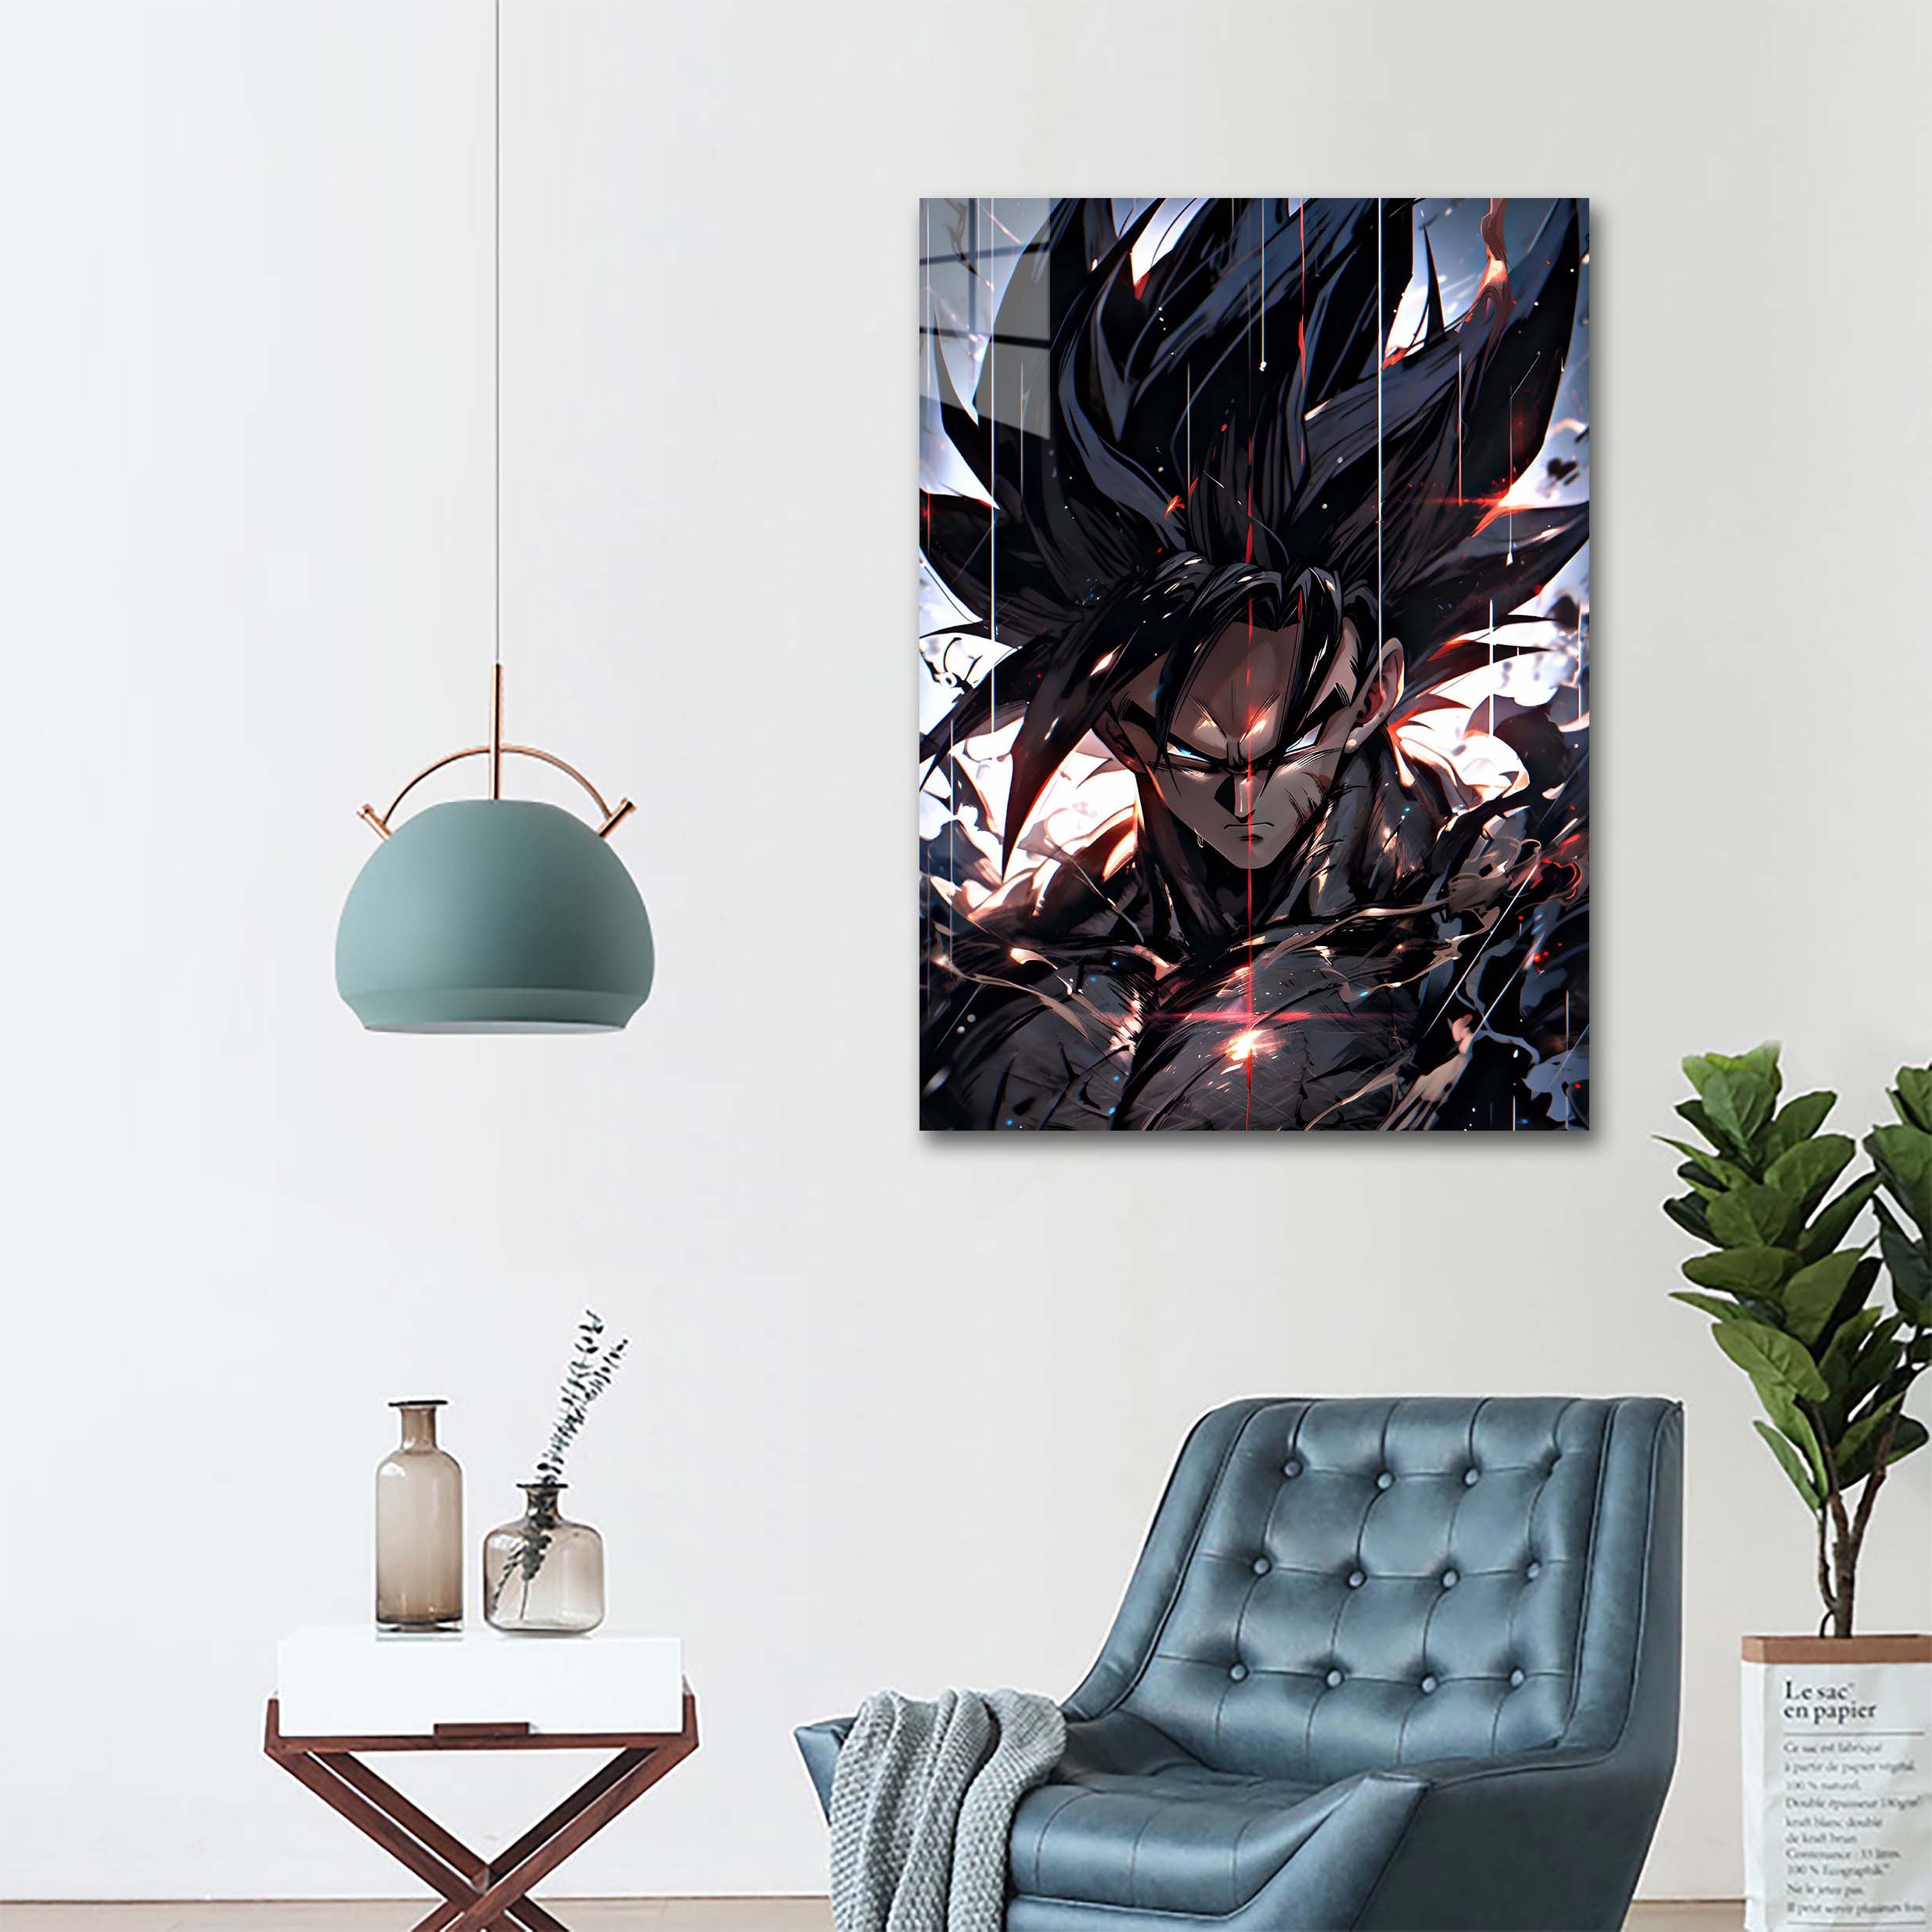 Black goku from dragonball z anime -designed by @Vid_M@tion